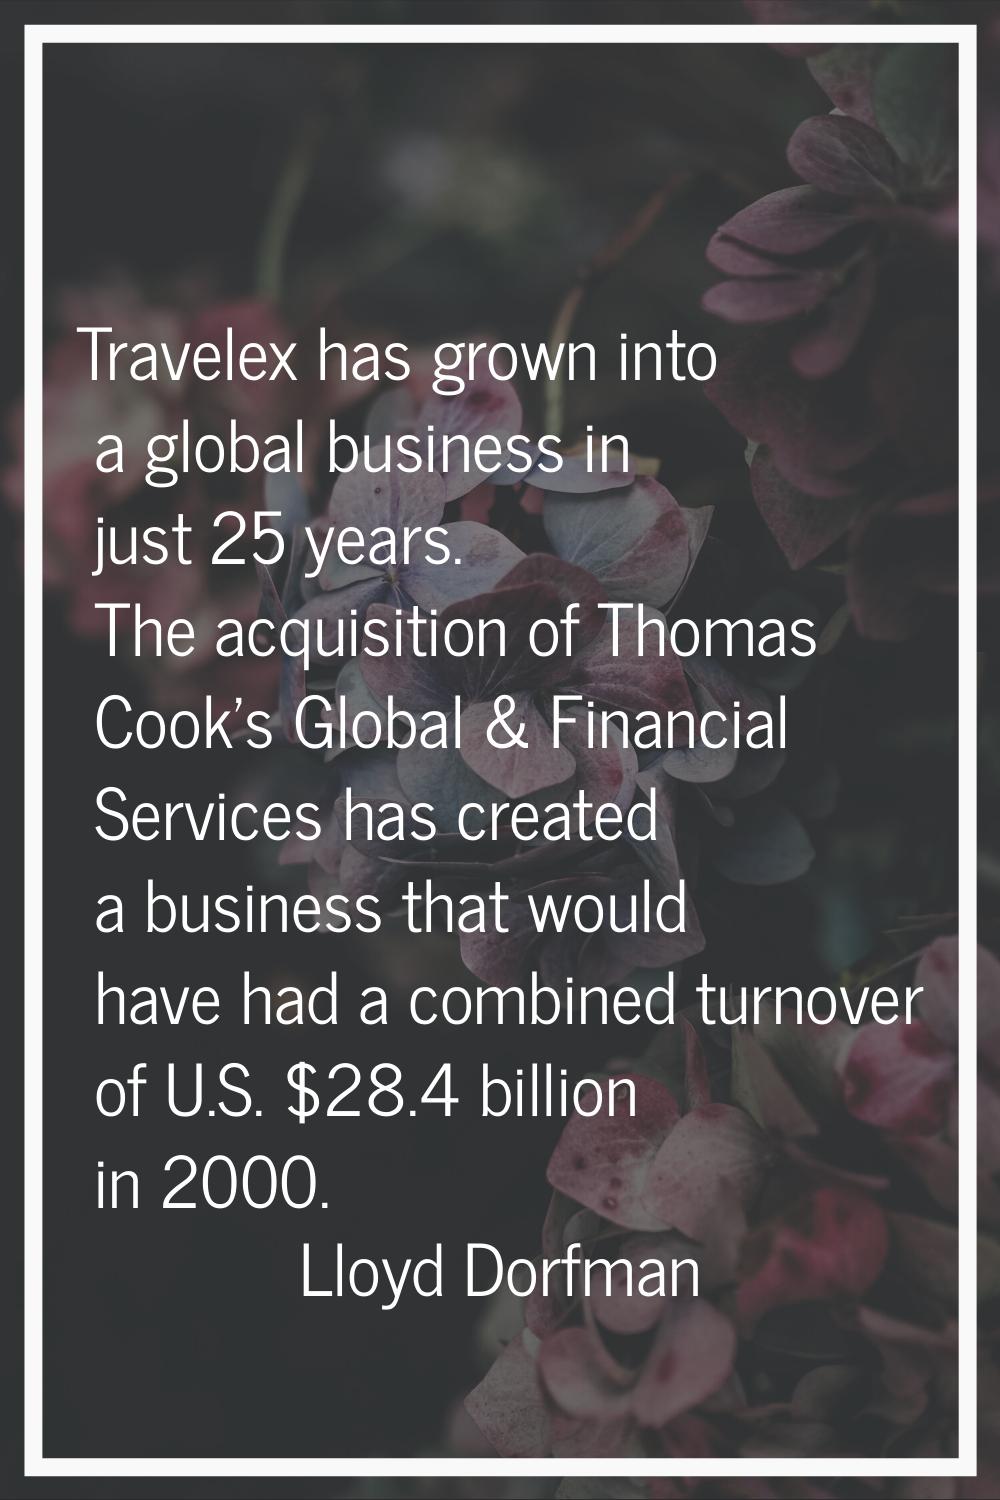 Travelex has grown into a global business in just 25 years. The acquisition of Thomas Cook's Global